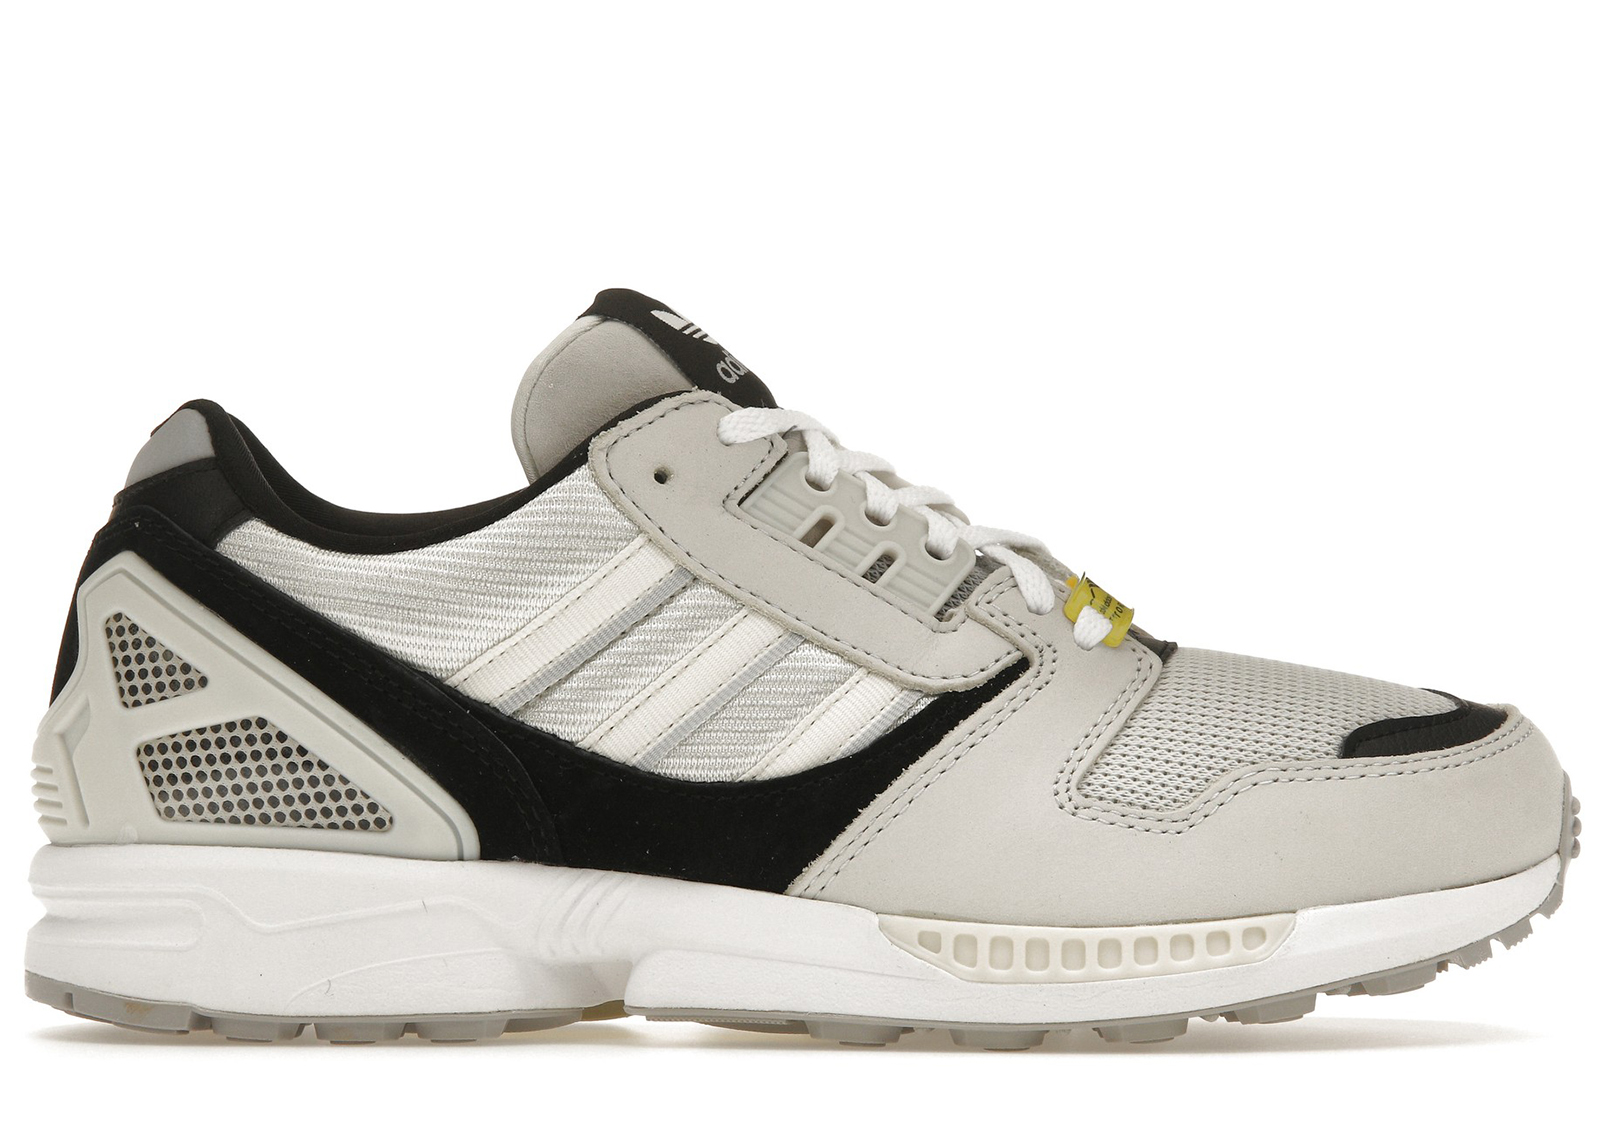 adidas ZX 8000 Charlie Fall of the Wall Men's - M18630 - US